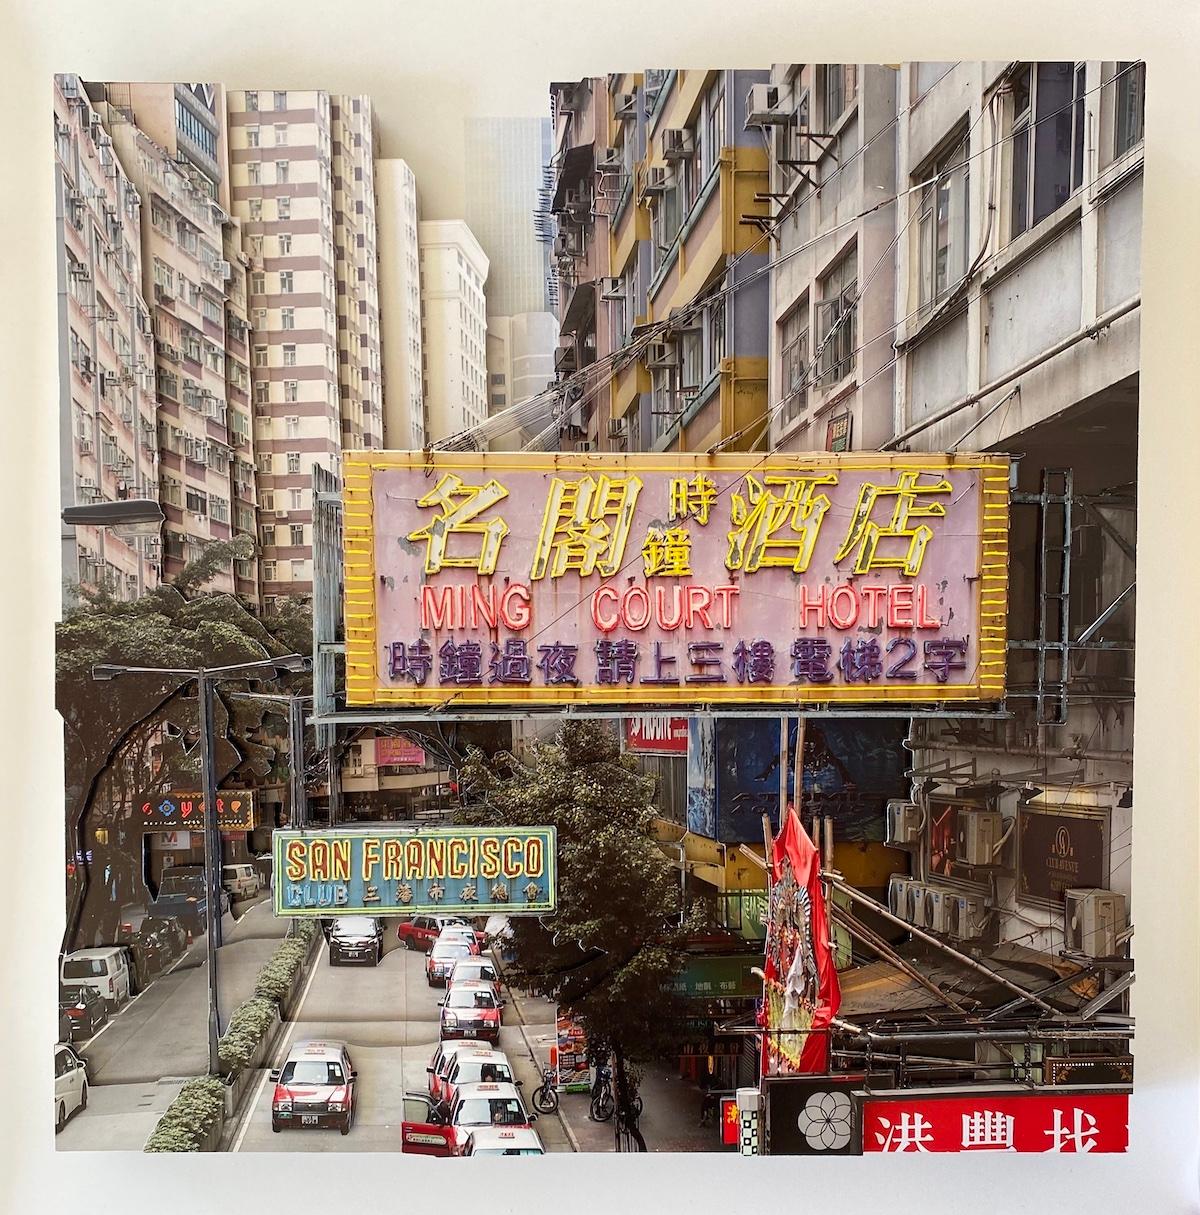 Camille Levert's work is imbued with her life in Hong Kong. Having spent many years roaming the streets with her camera, the city and its iconic neon
lights inspire her to create three-dimensional collages that allow her to deepen the process and